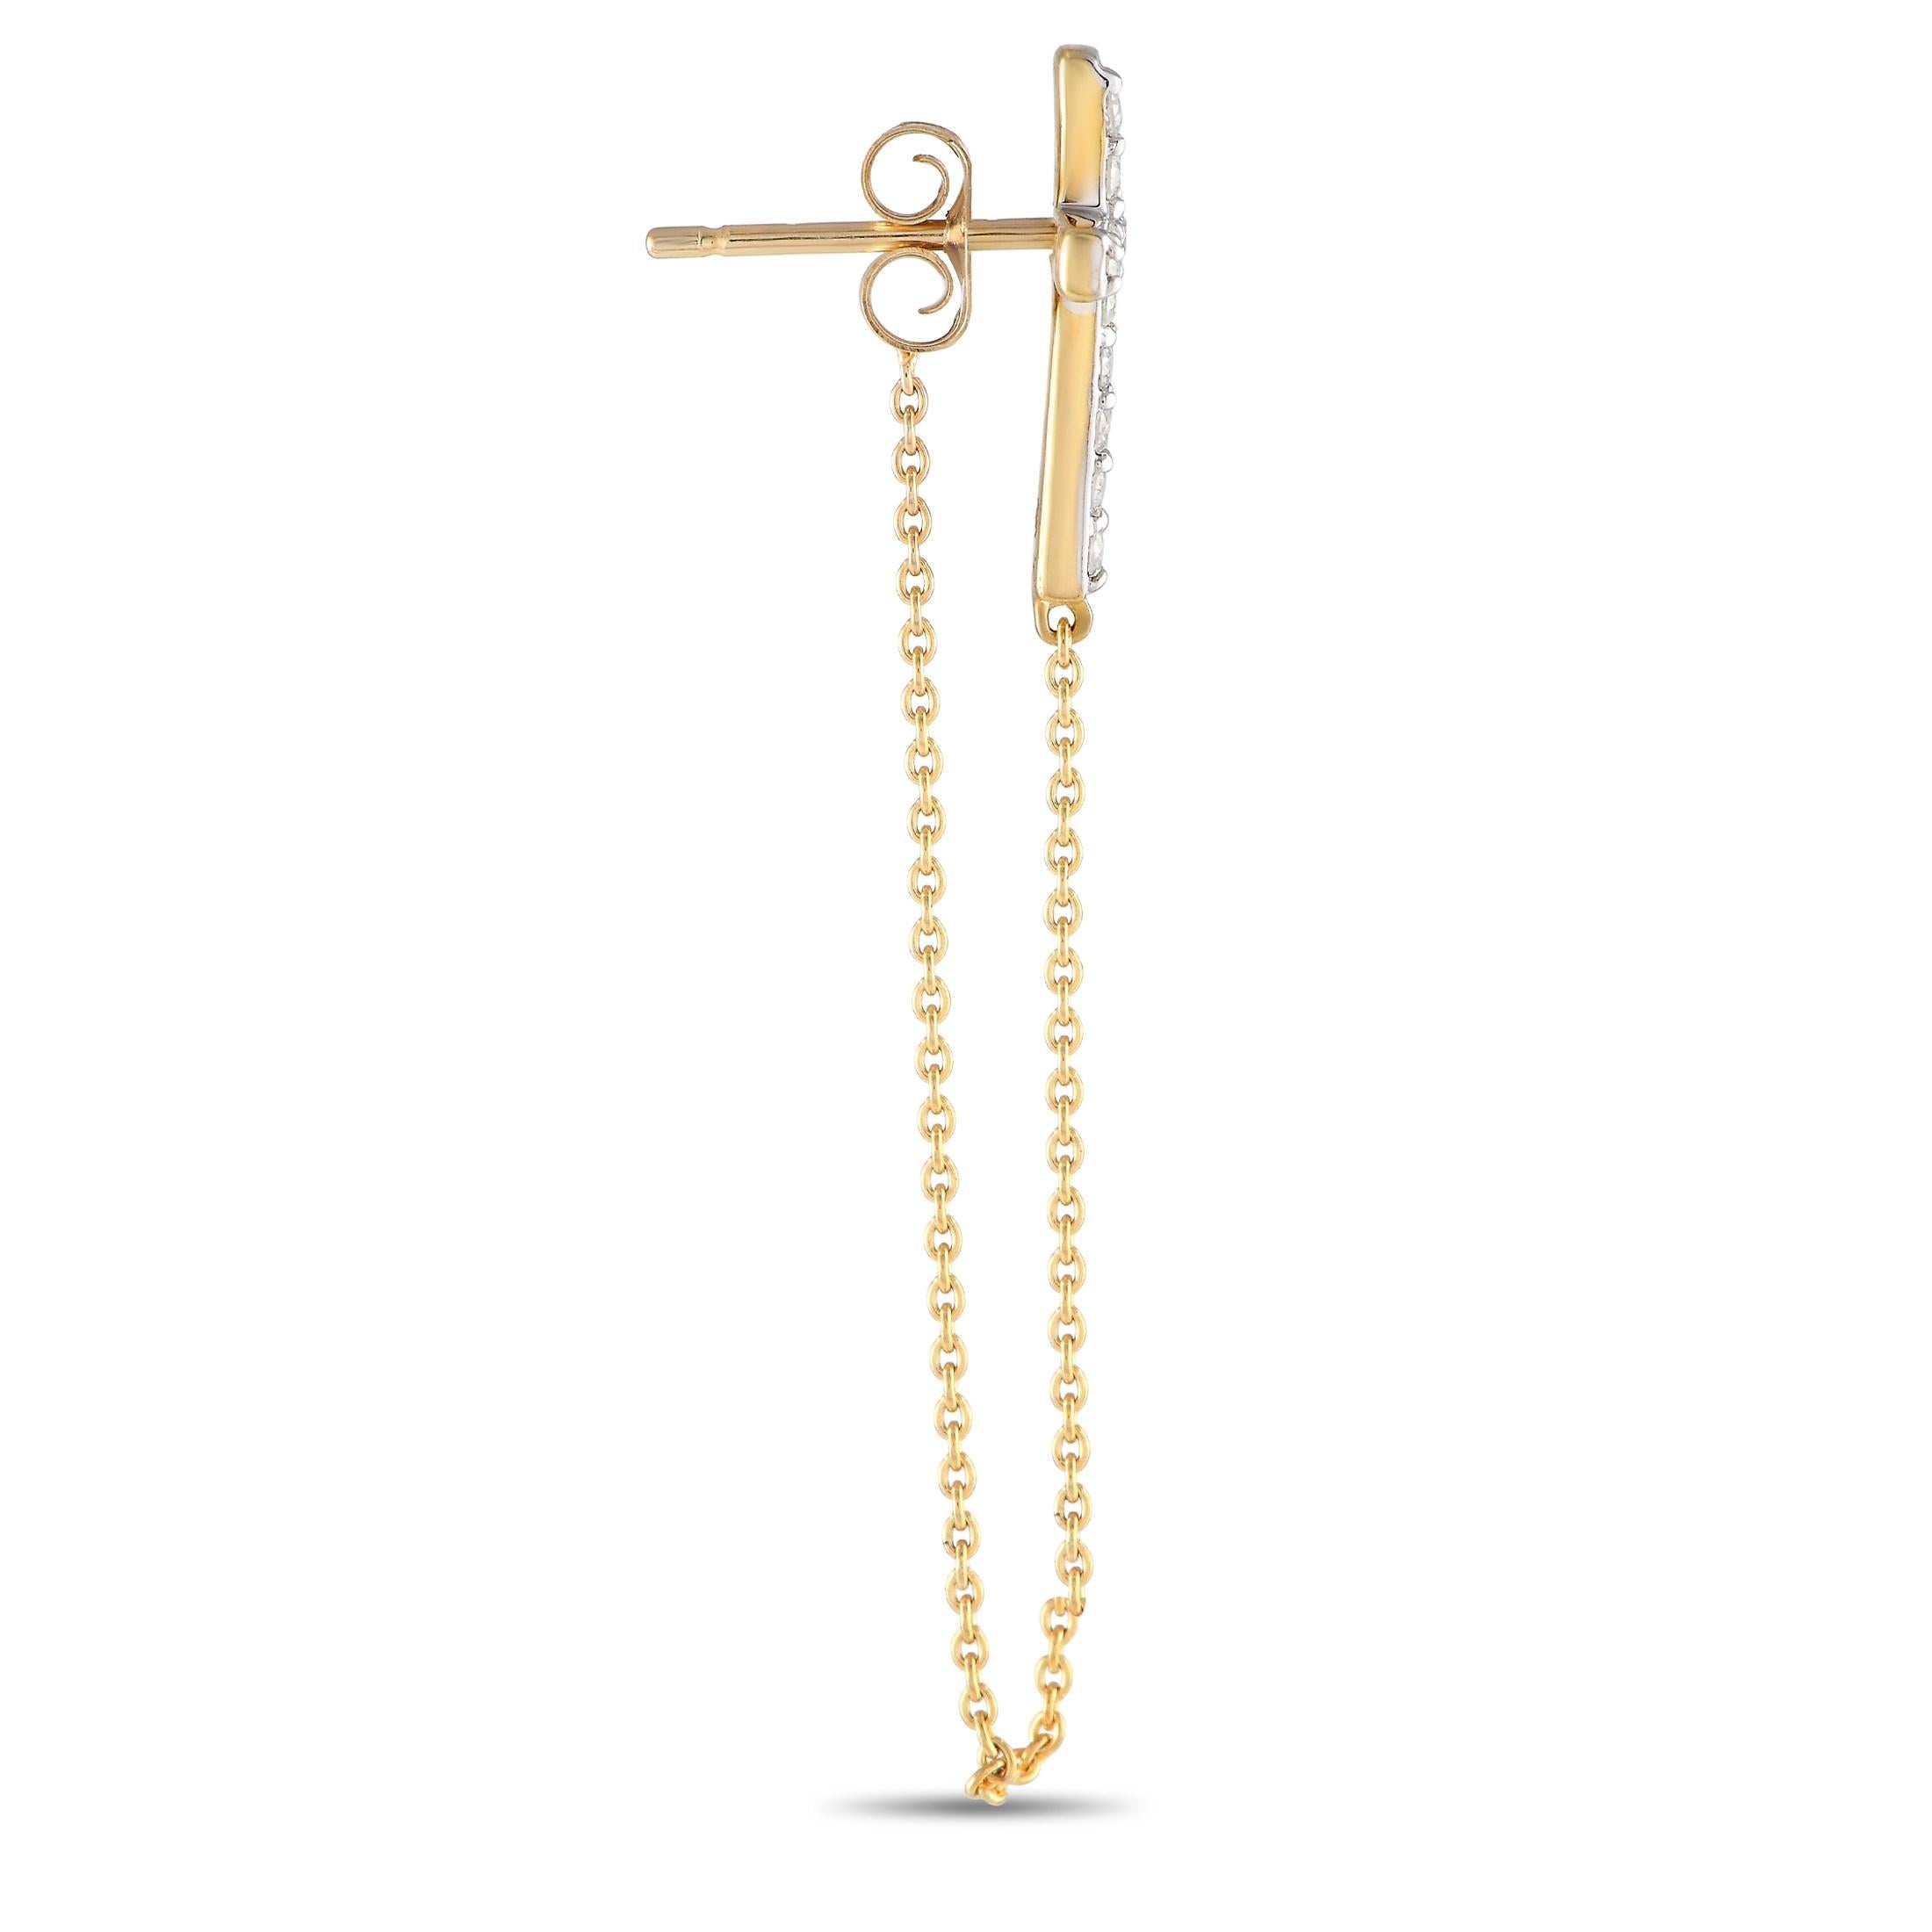 A dramatic drop chain accents elevates these impeccable crafted 10K Yellow Gold earrings. At the base, a cross motif comes to life thanks to sparkling Diamonds with a total weight of 0.25 carats. Each one measures 1.65 long, 0.35 wide, and comes